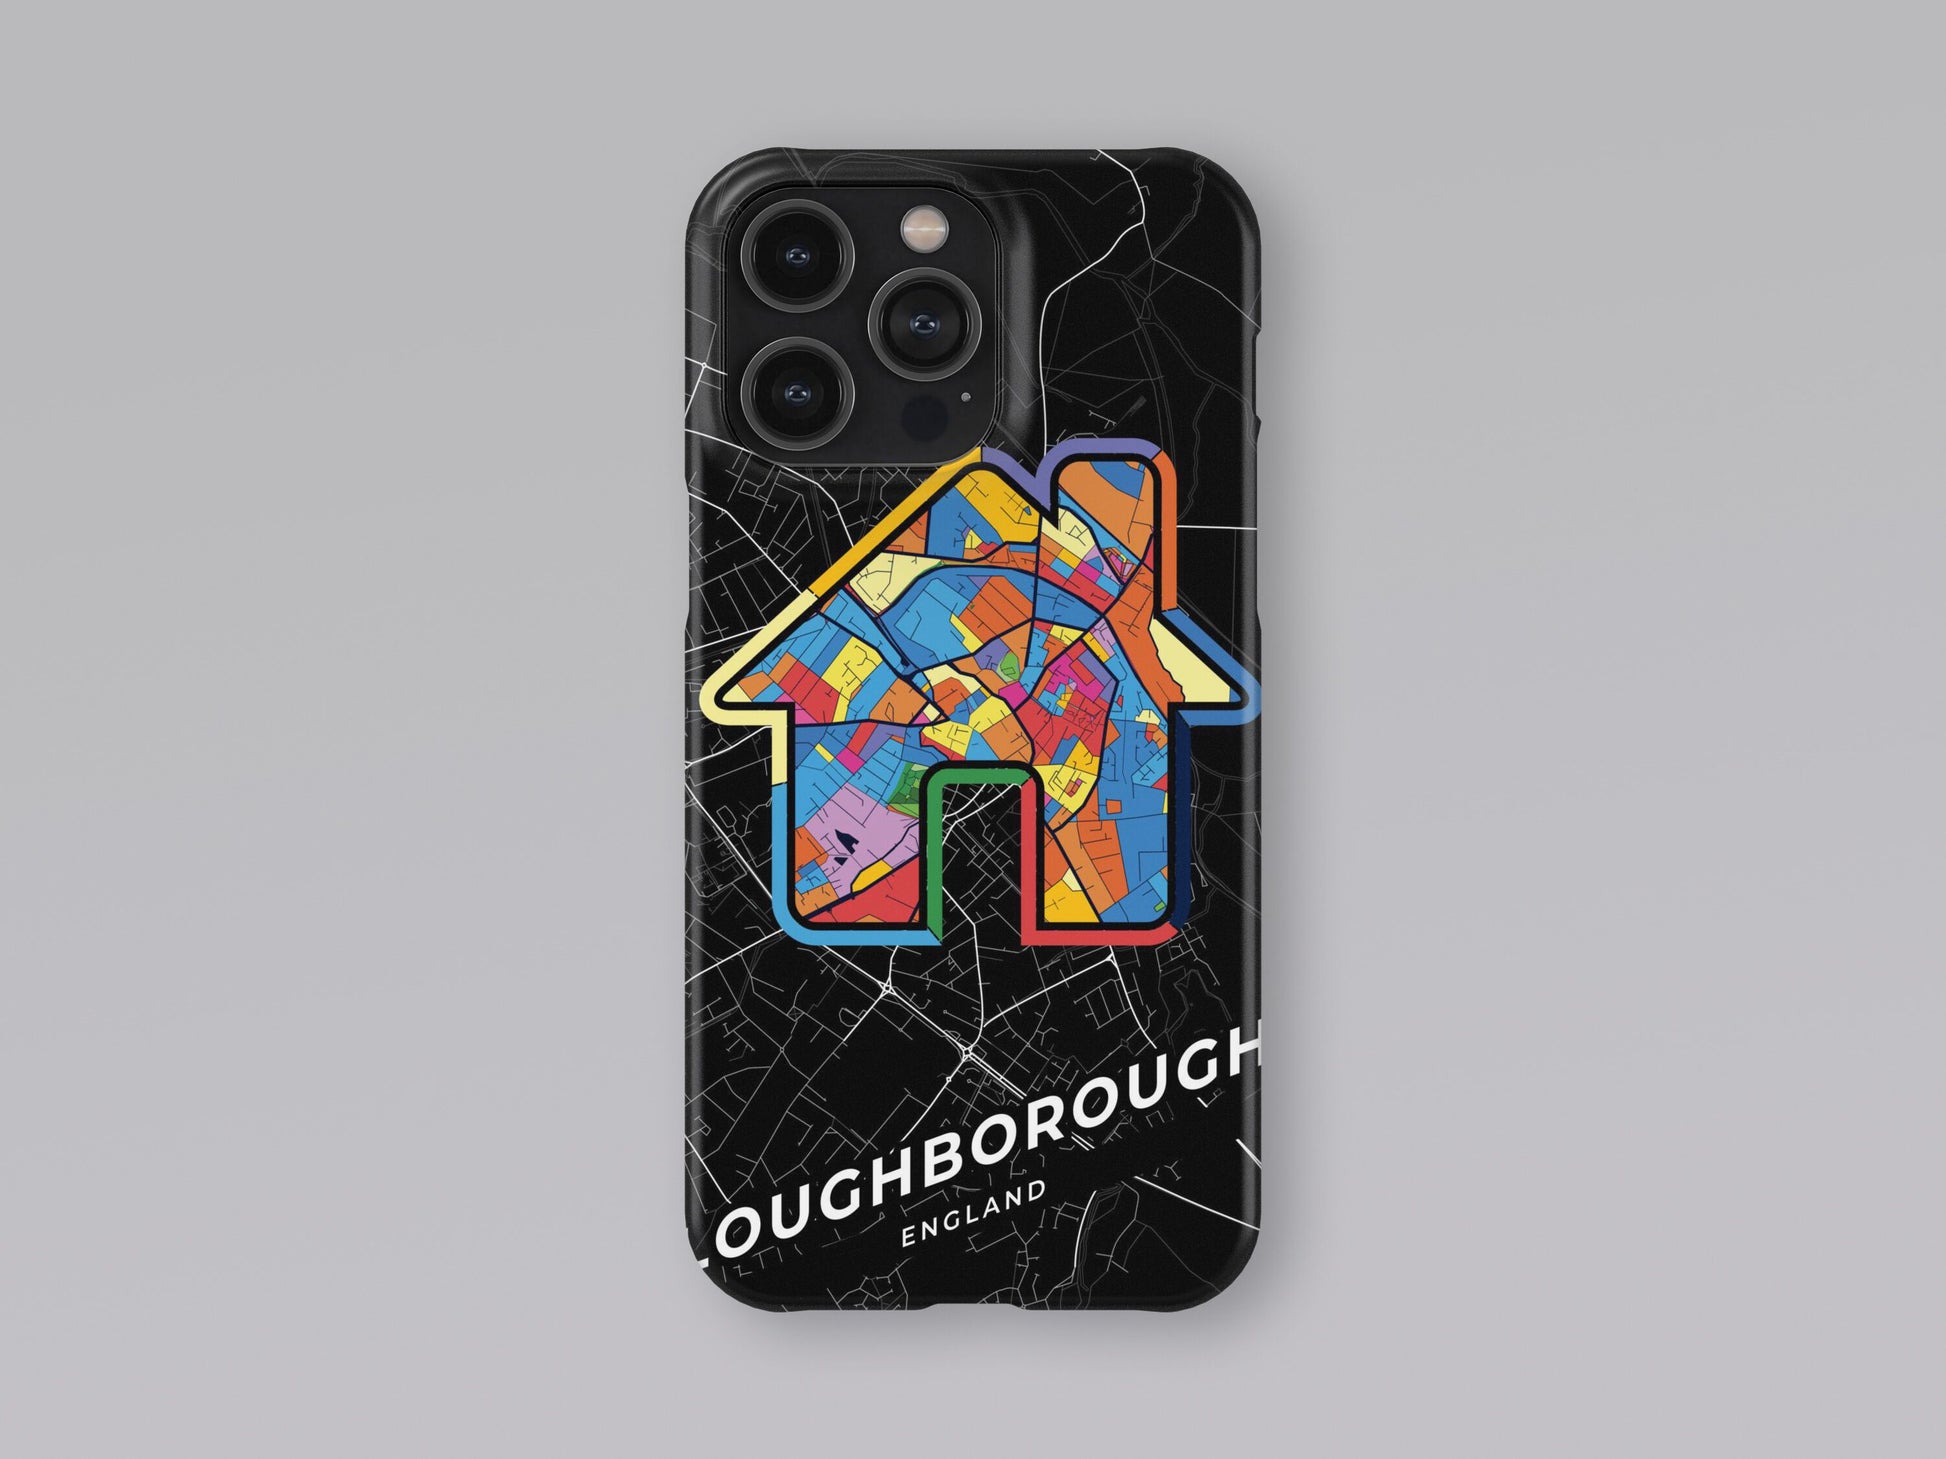 Loughborough England slim phone case with colorful icon. Birthday, wedding or housewarming gift. Couple match cases. 3